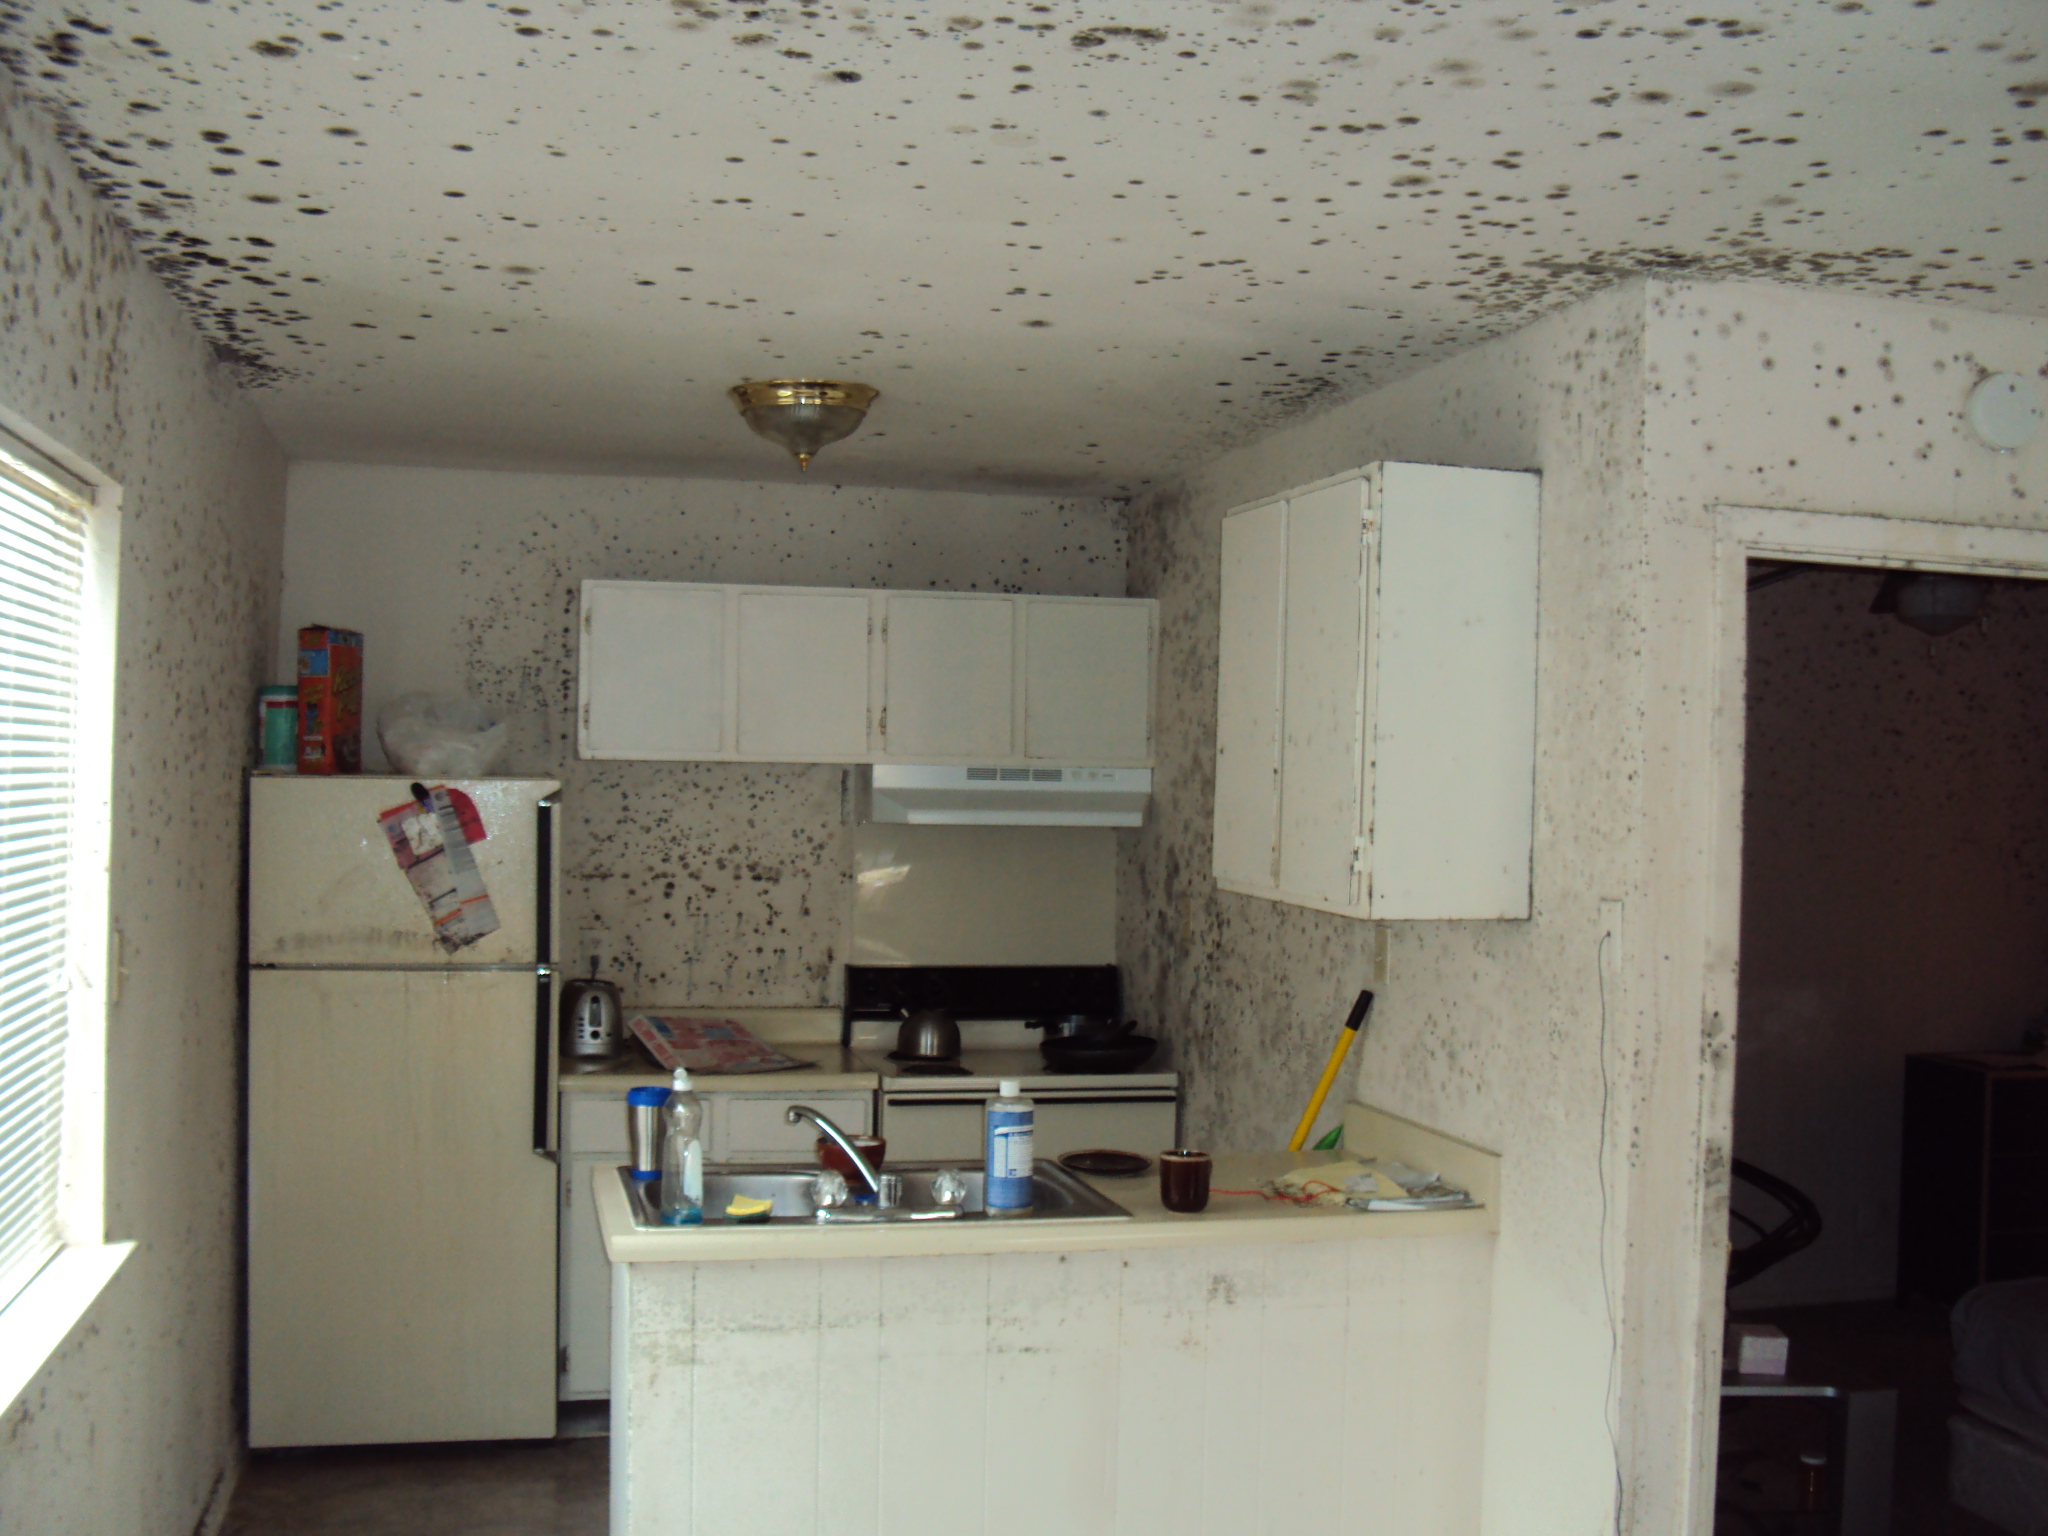 March 2023 – Mold Terms